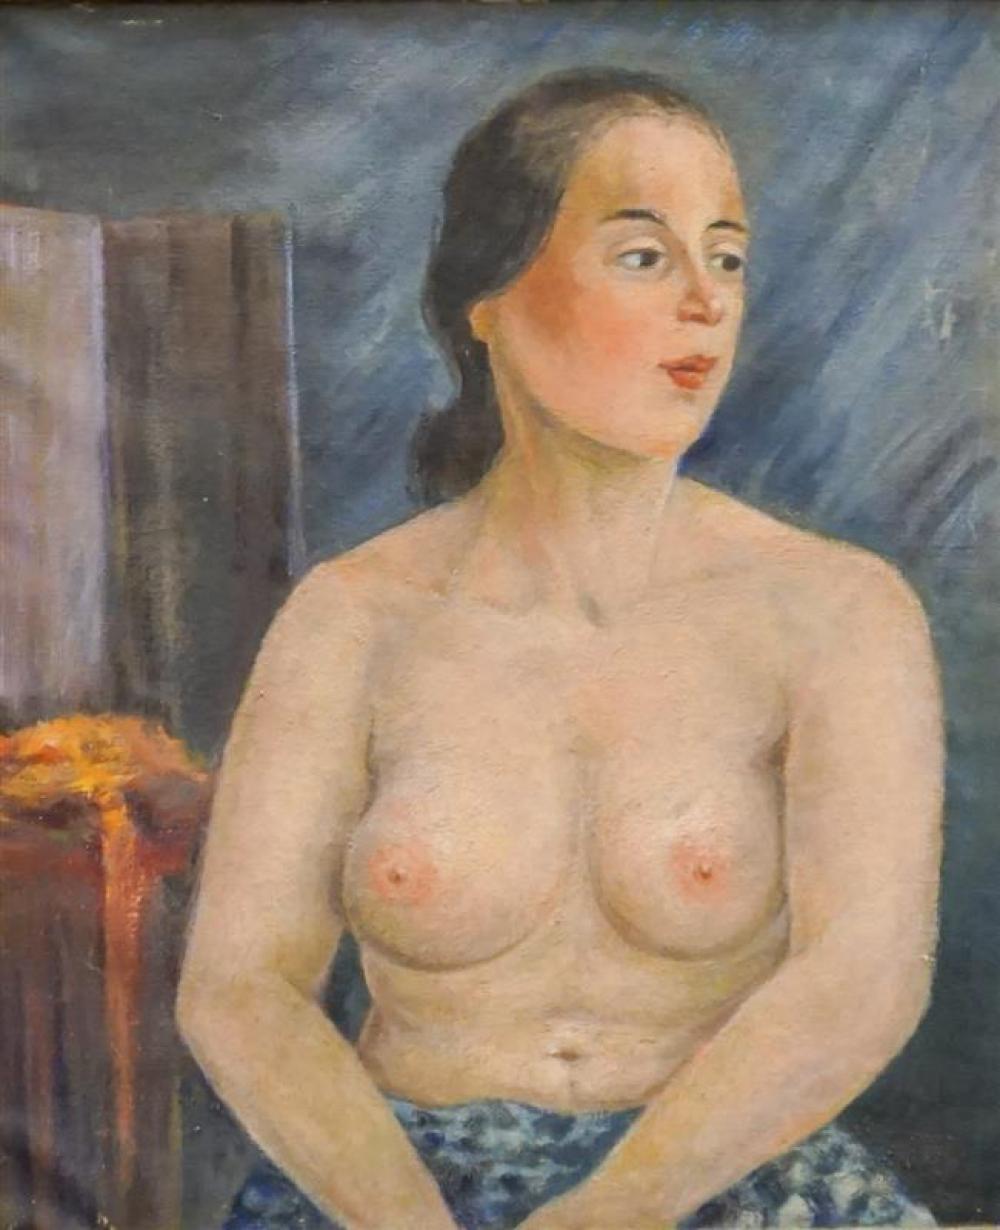 PORTRAIT OF NUDE WOMAN SIGNED 322a28